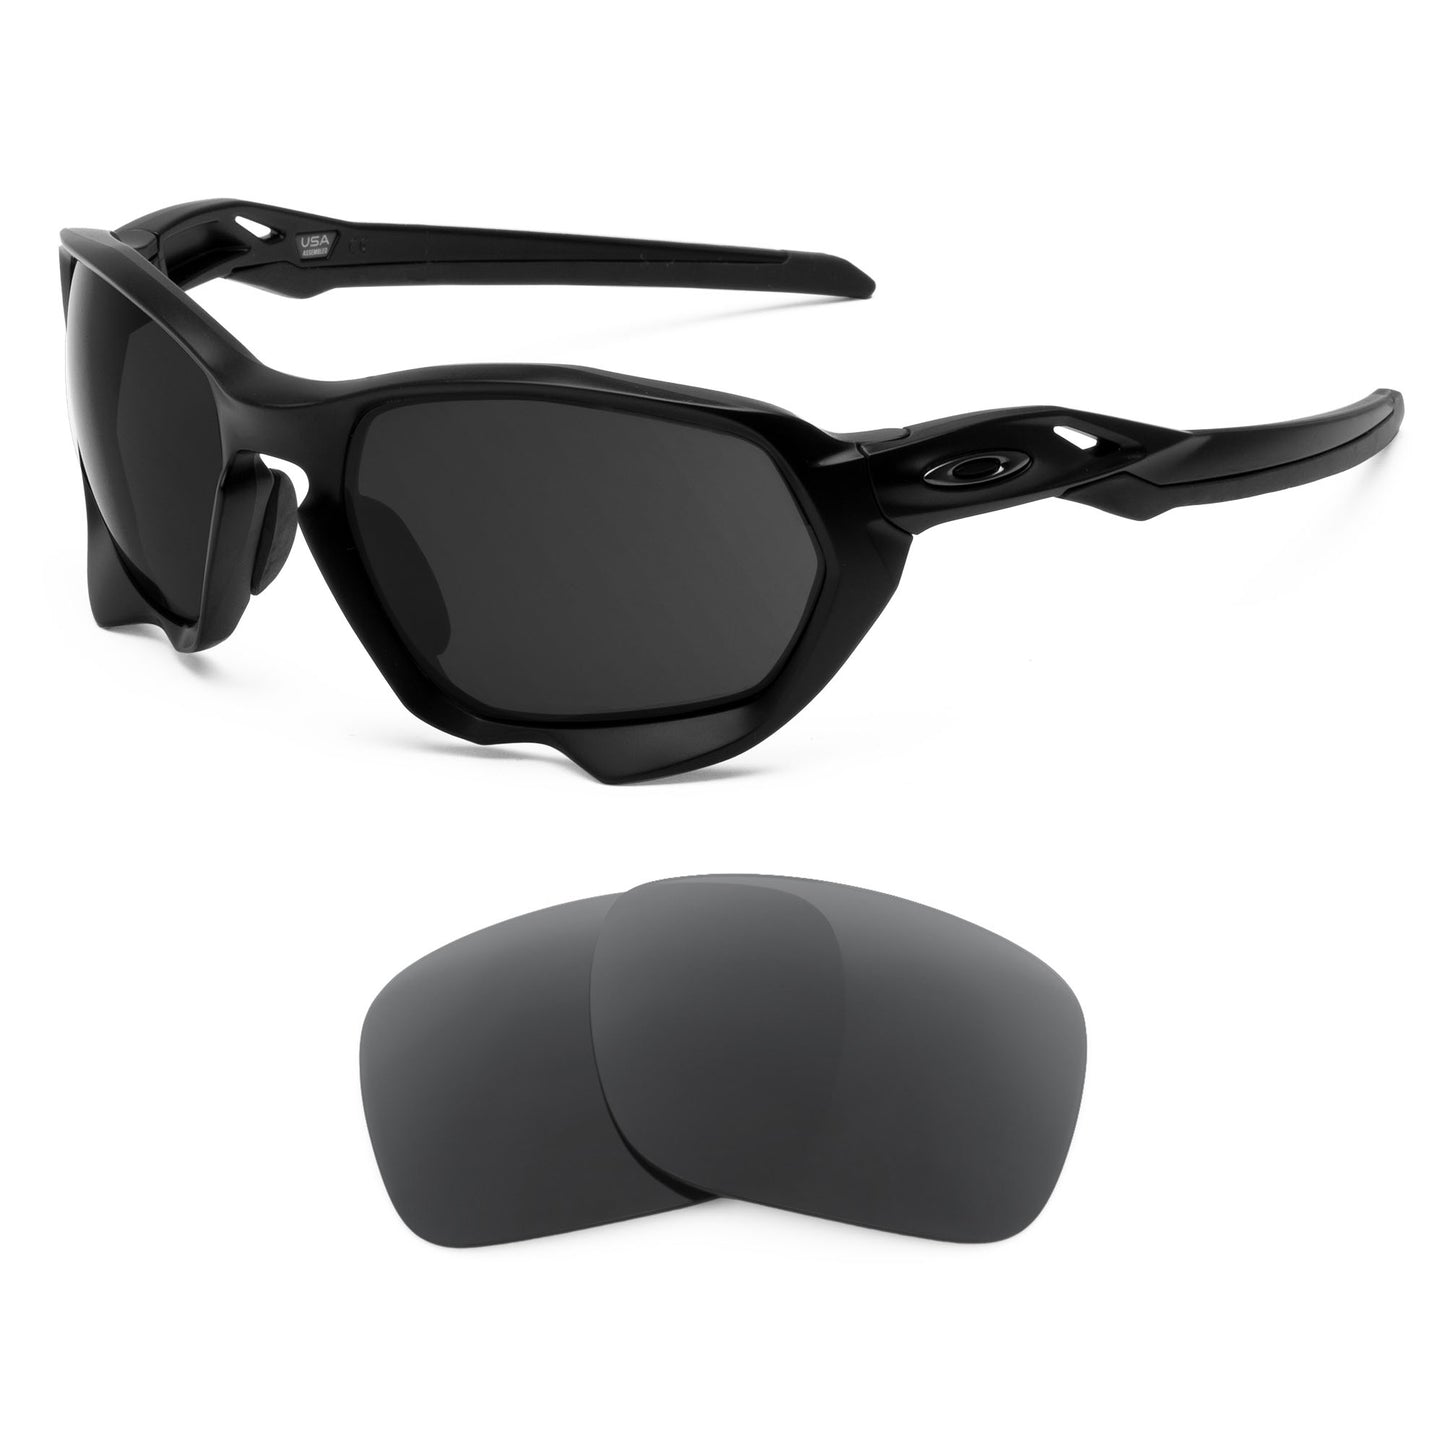 Oakley Plazma sunglasses with replacement lenses